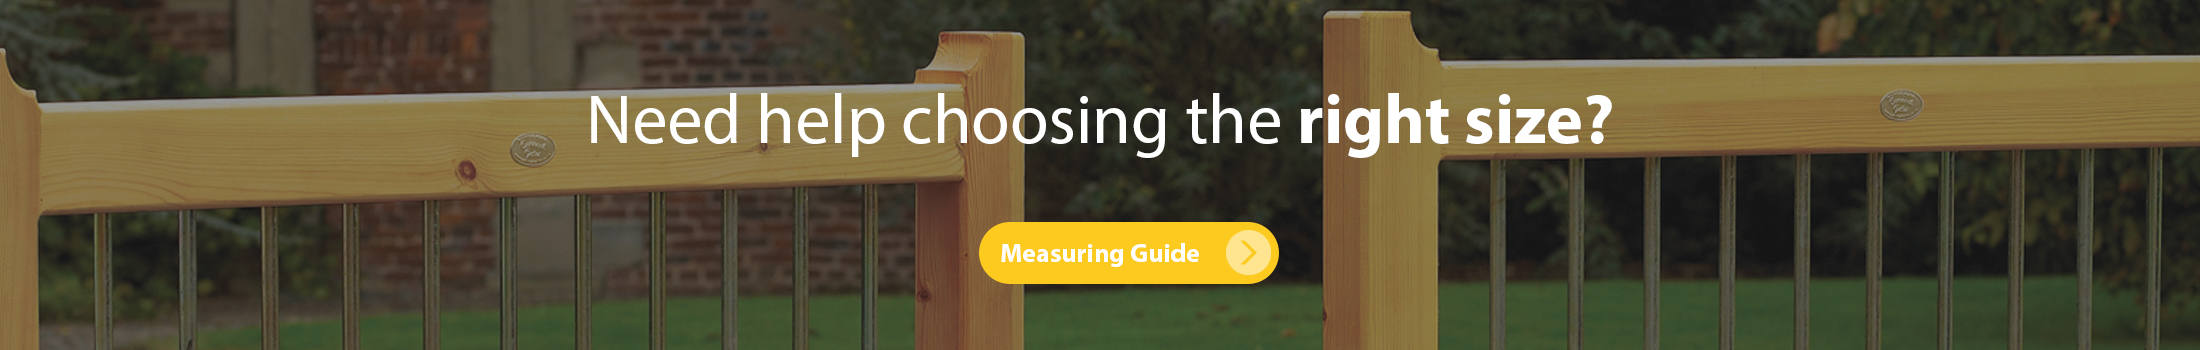 View the measuring guide here for help with ordering sizes